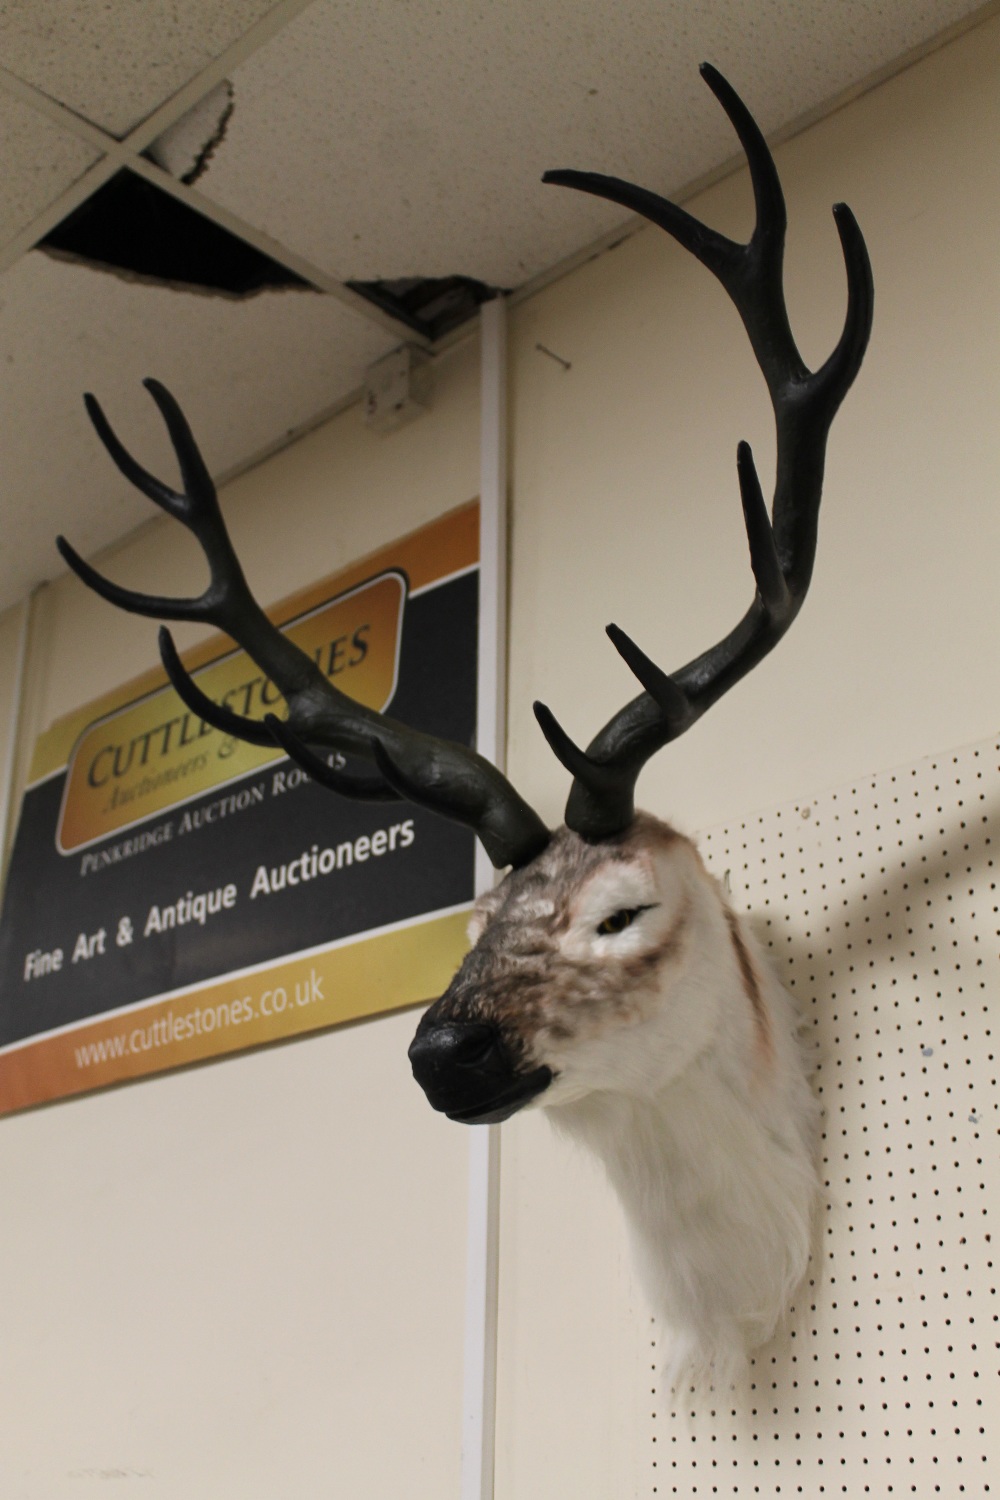 A MODERN TAXIDERMY STYLE WALL HANGING PLUSH STAGS HEAD